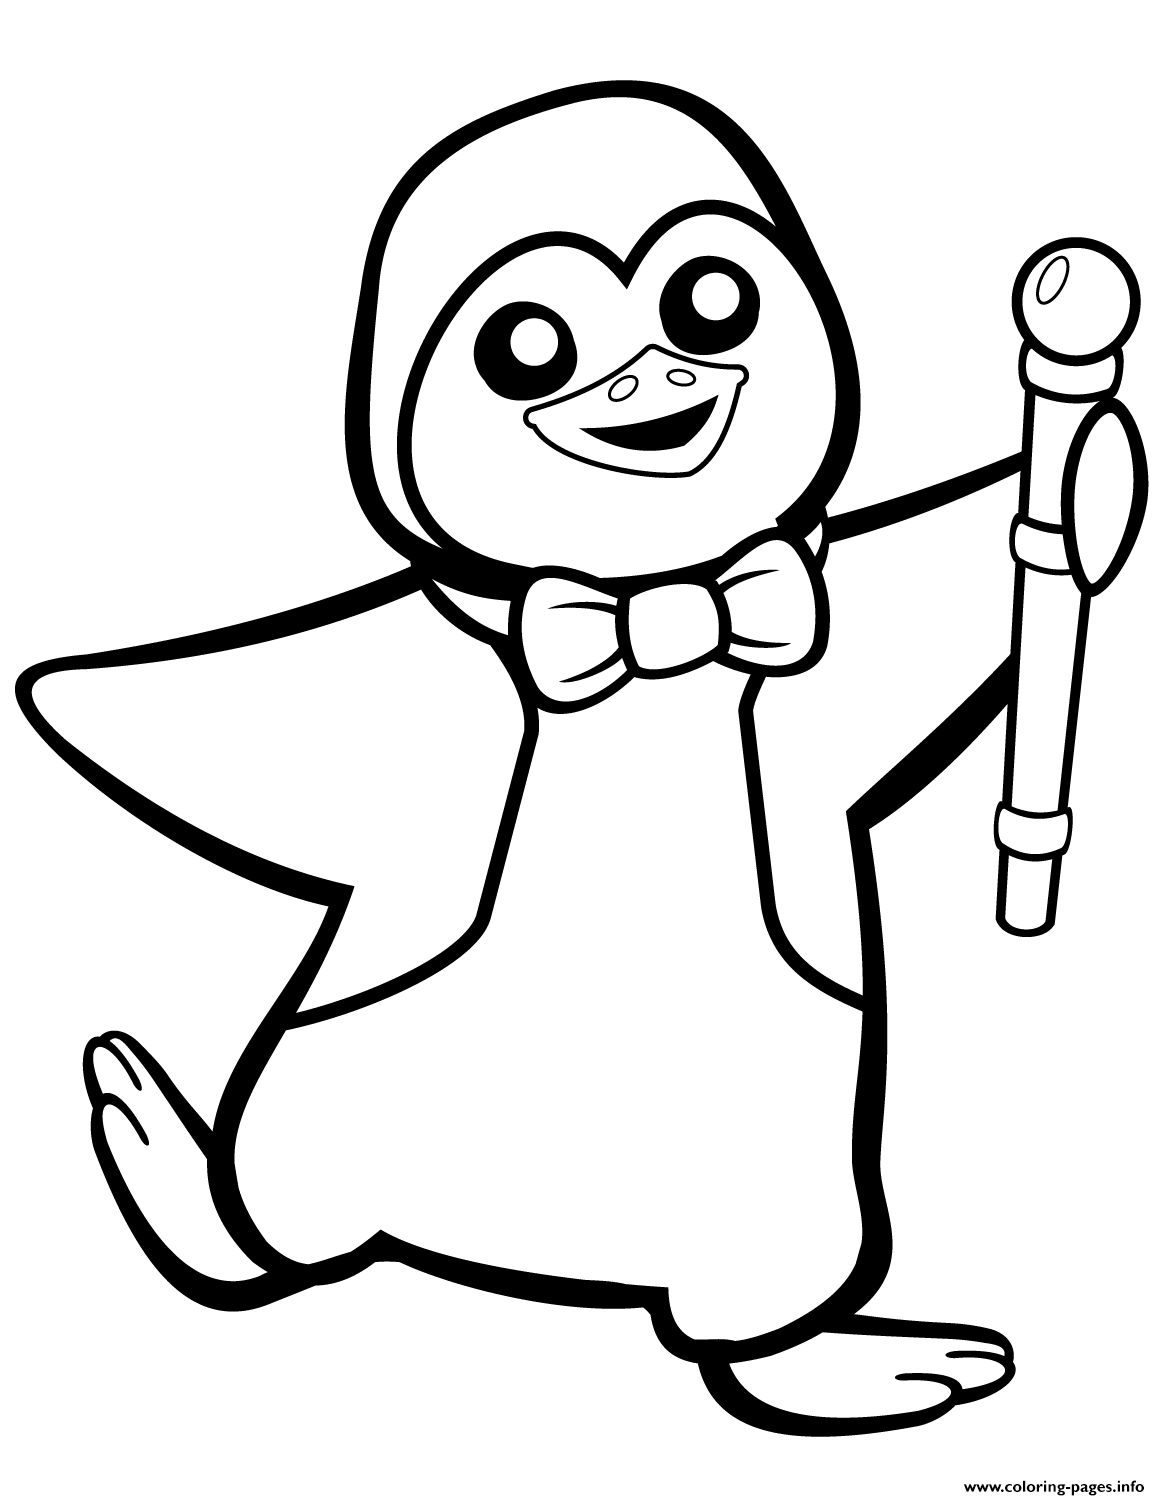 Funny Penguin With Bow Tie coloring